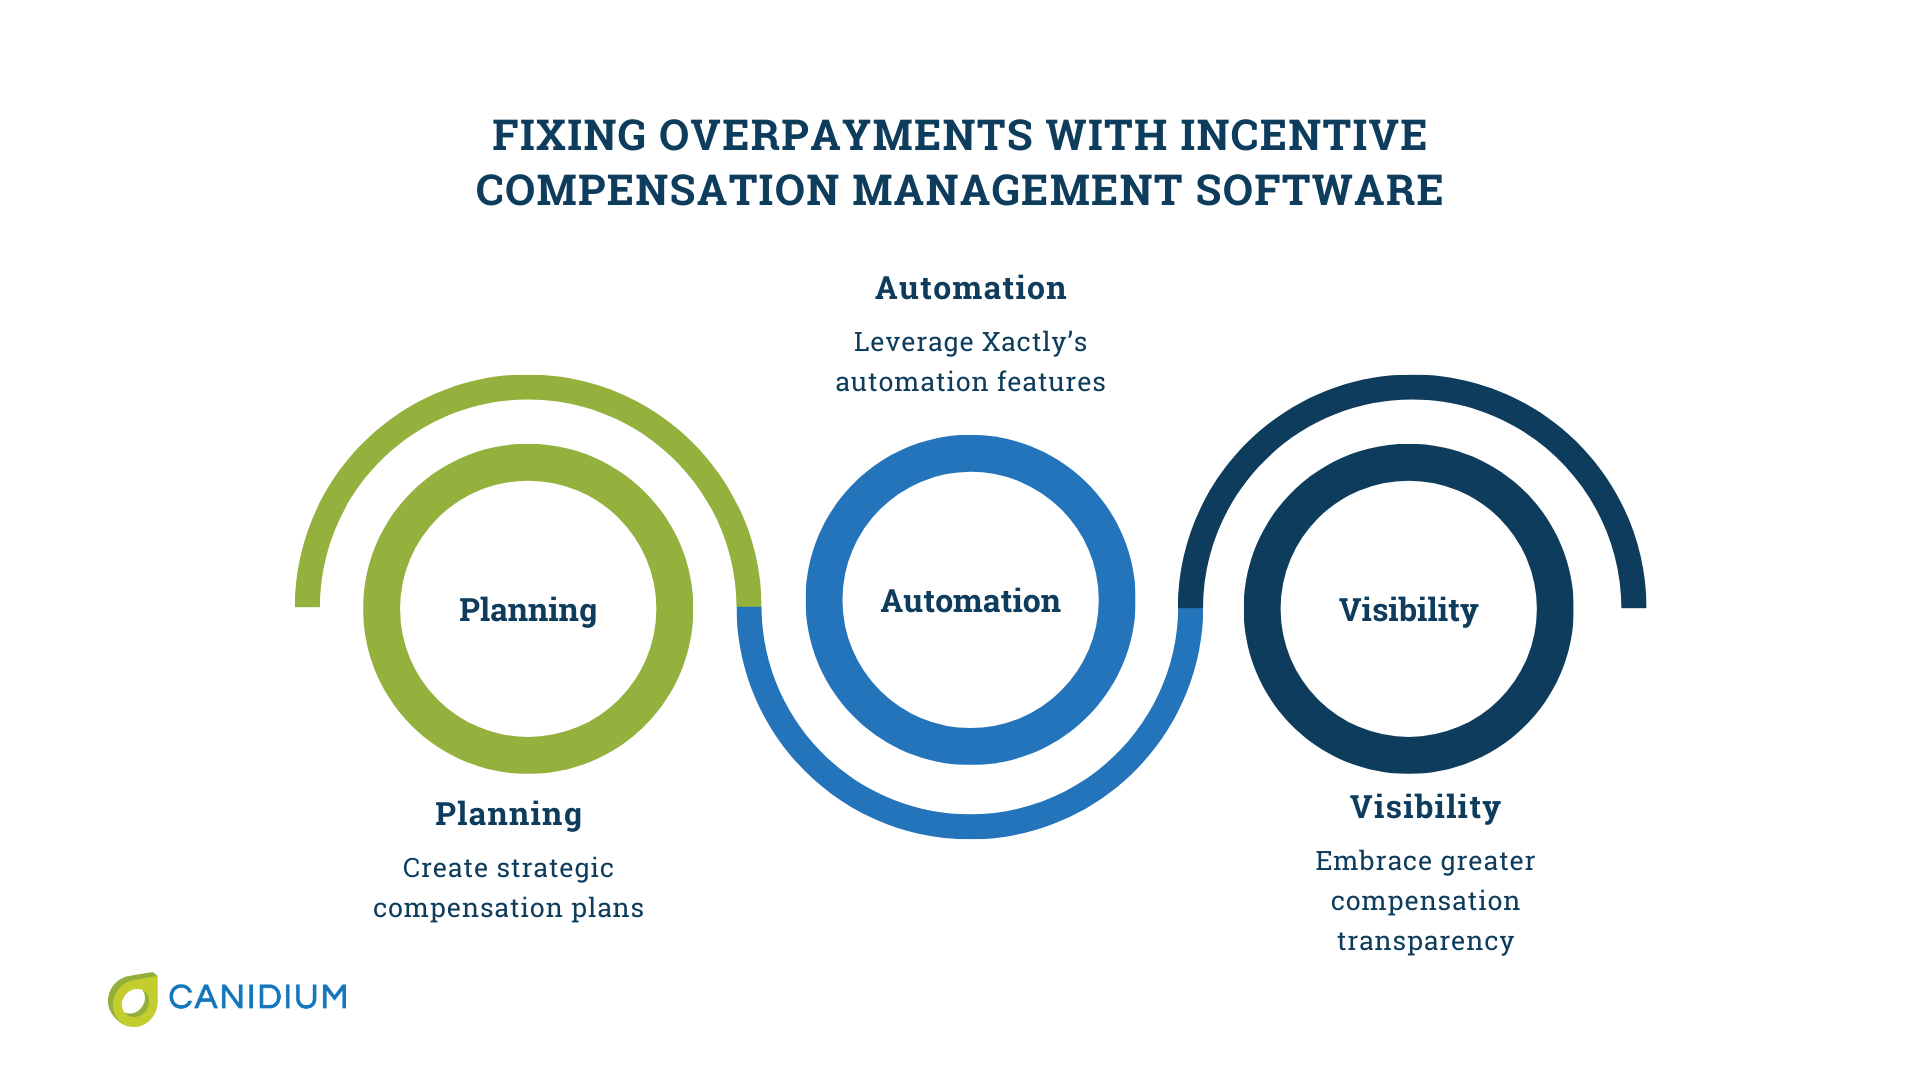 Fixing overpayments with incentive compensation management software